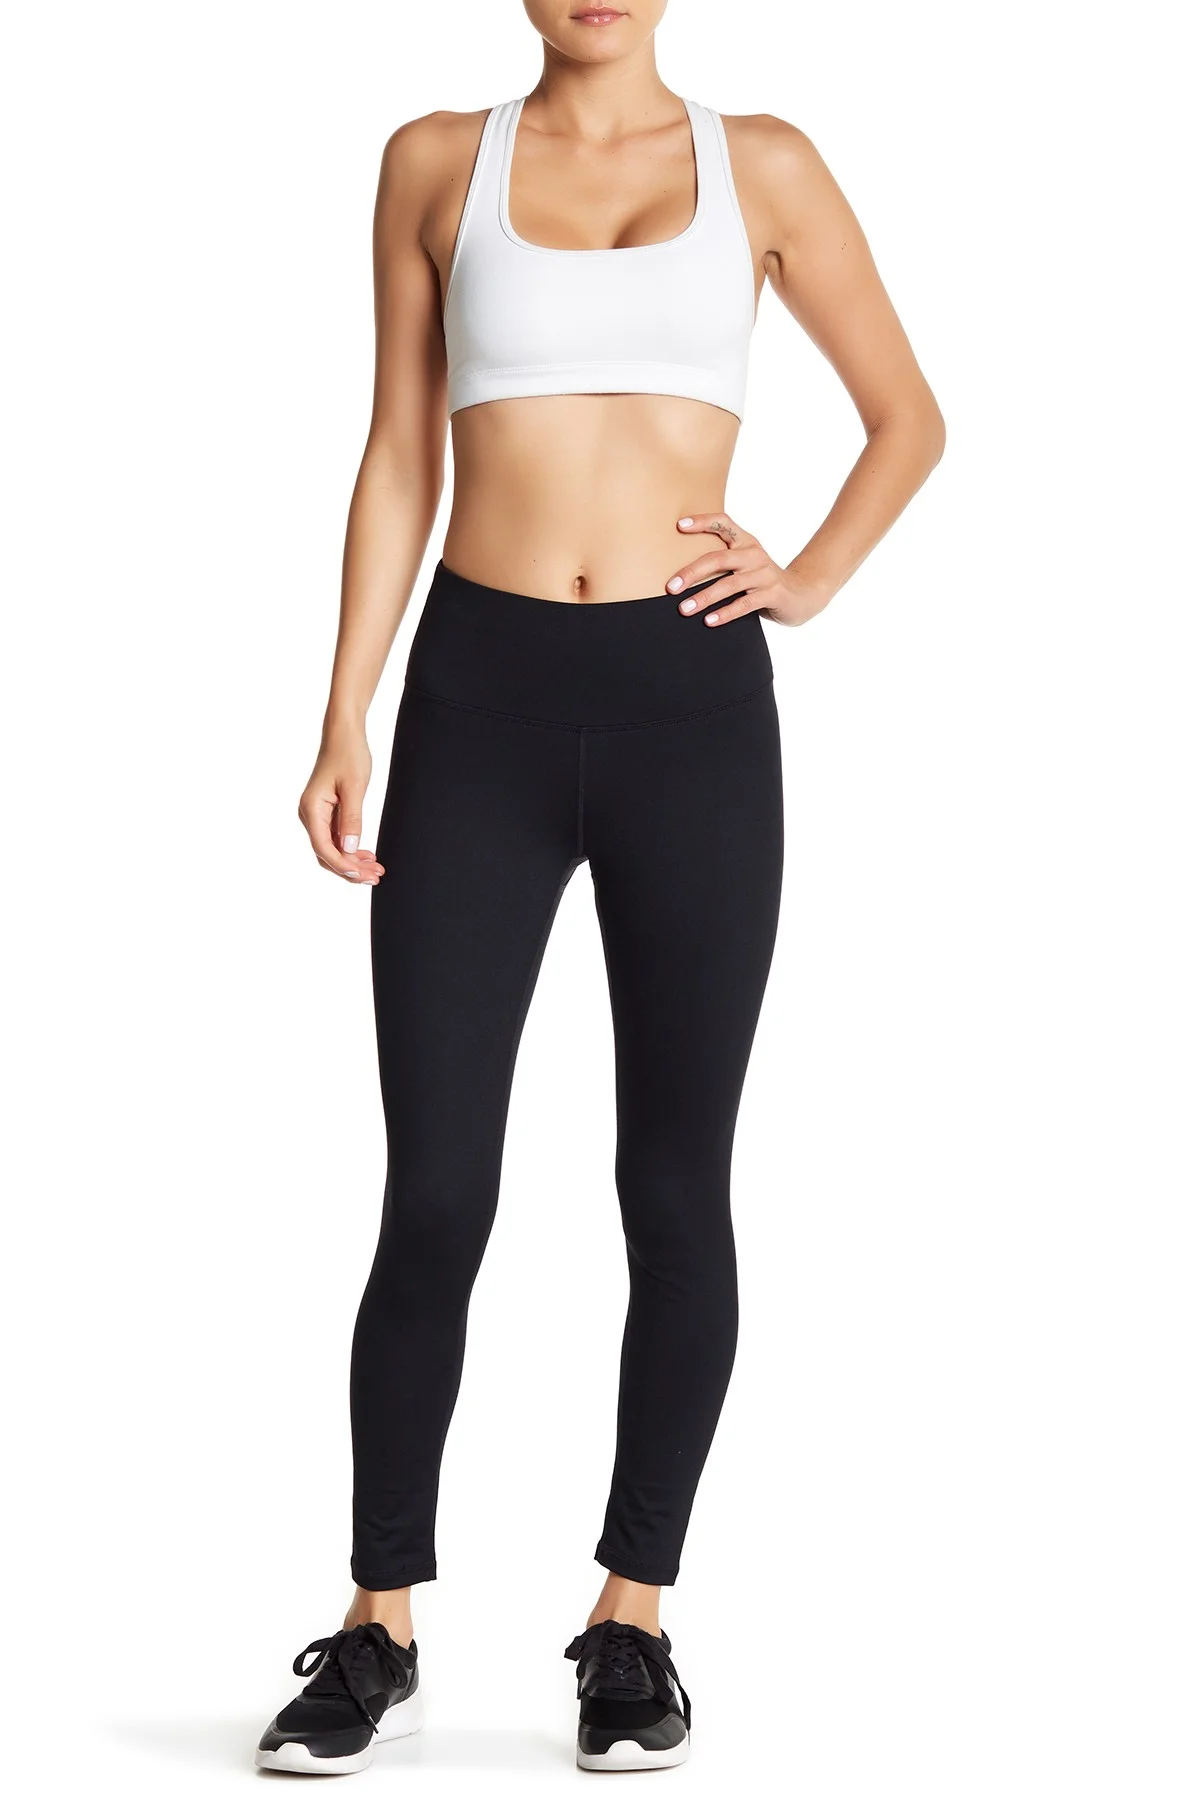 NEW Z By Zella Daily High Waisted Crop Pocket Leggings - Black - Plus Size  3X